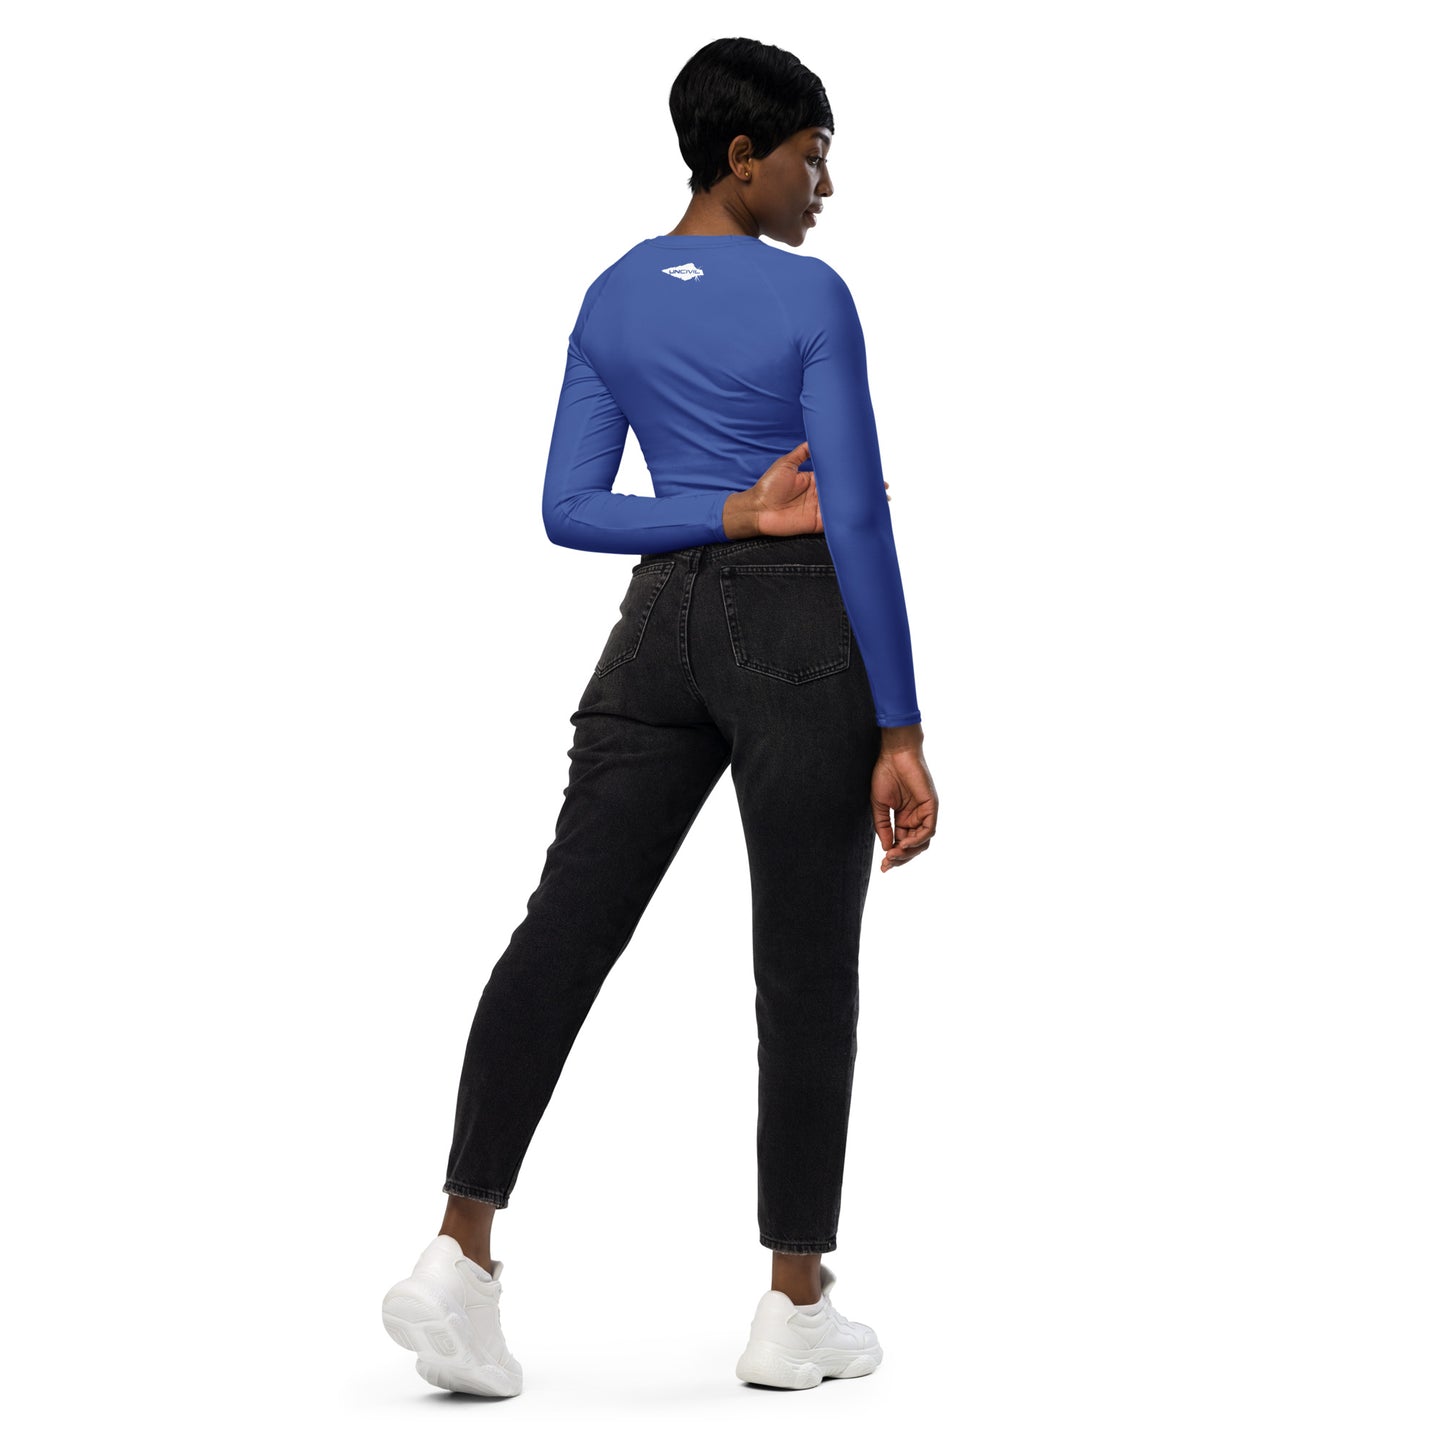 Baby Blue long-sleeve crop top for women is made of recycled polyester and elastane, making it an eco-friendly choice for swimming, sports, or athleisure. UPF 50+.